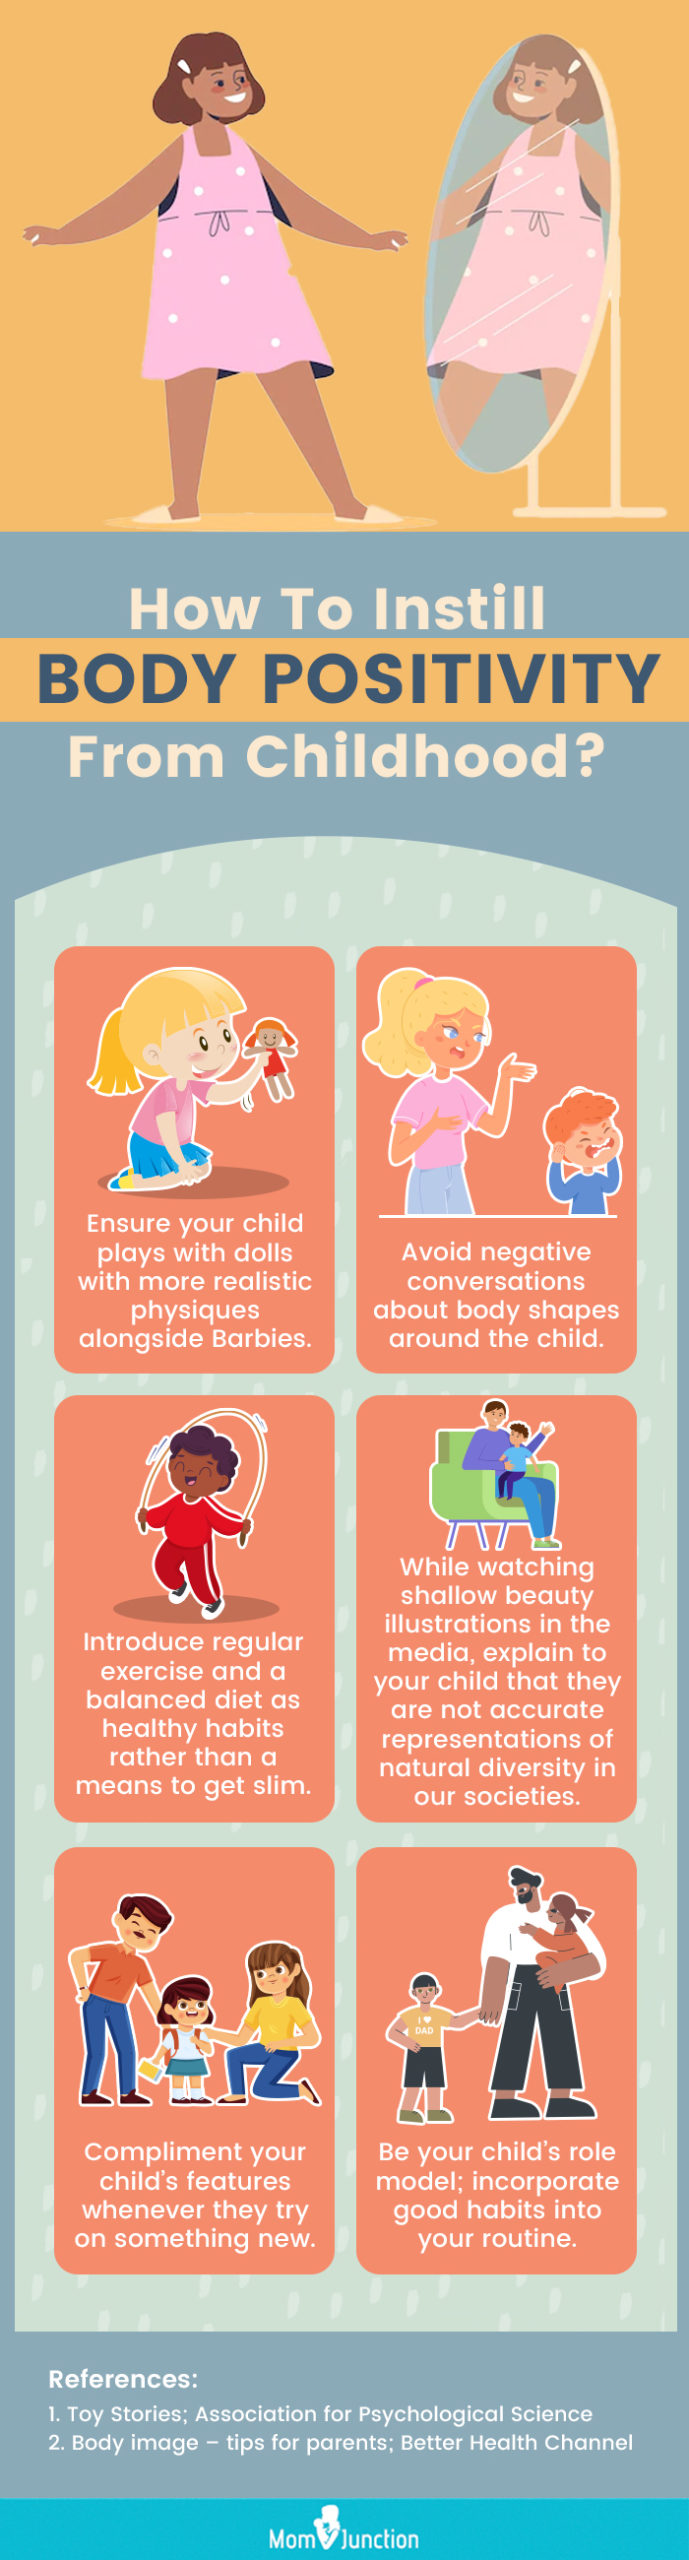 How To Instill Body Positivity Since Childhood (infographic)